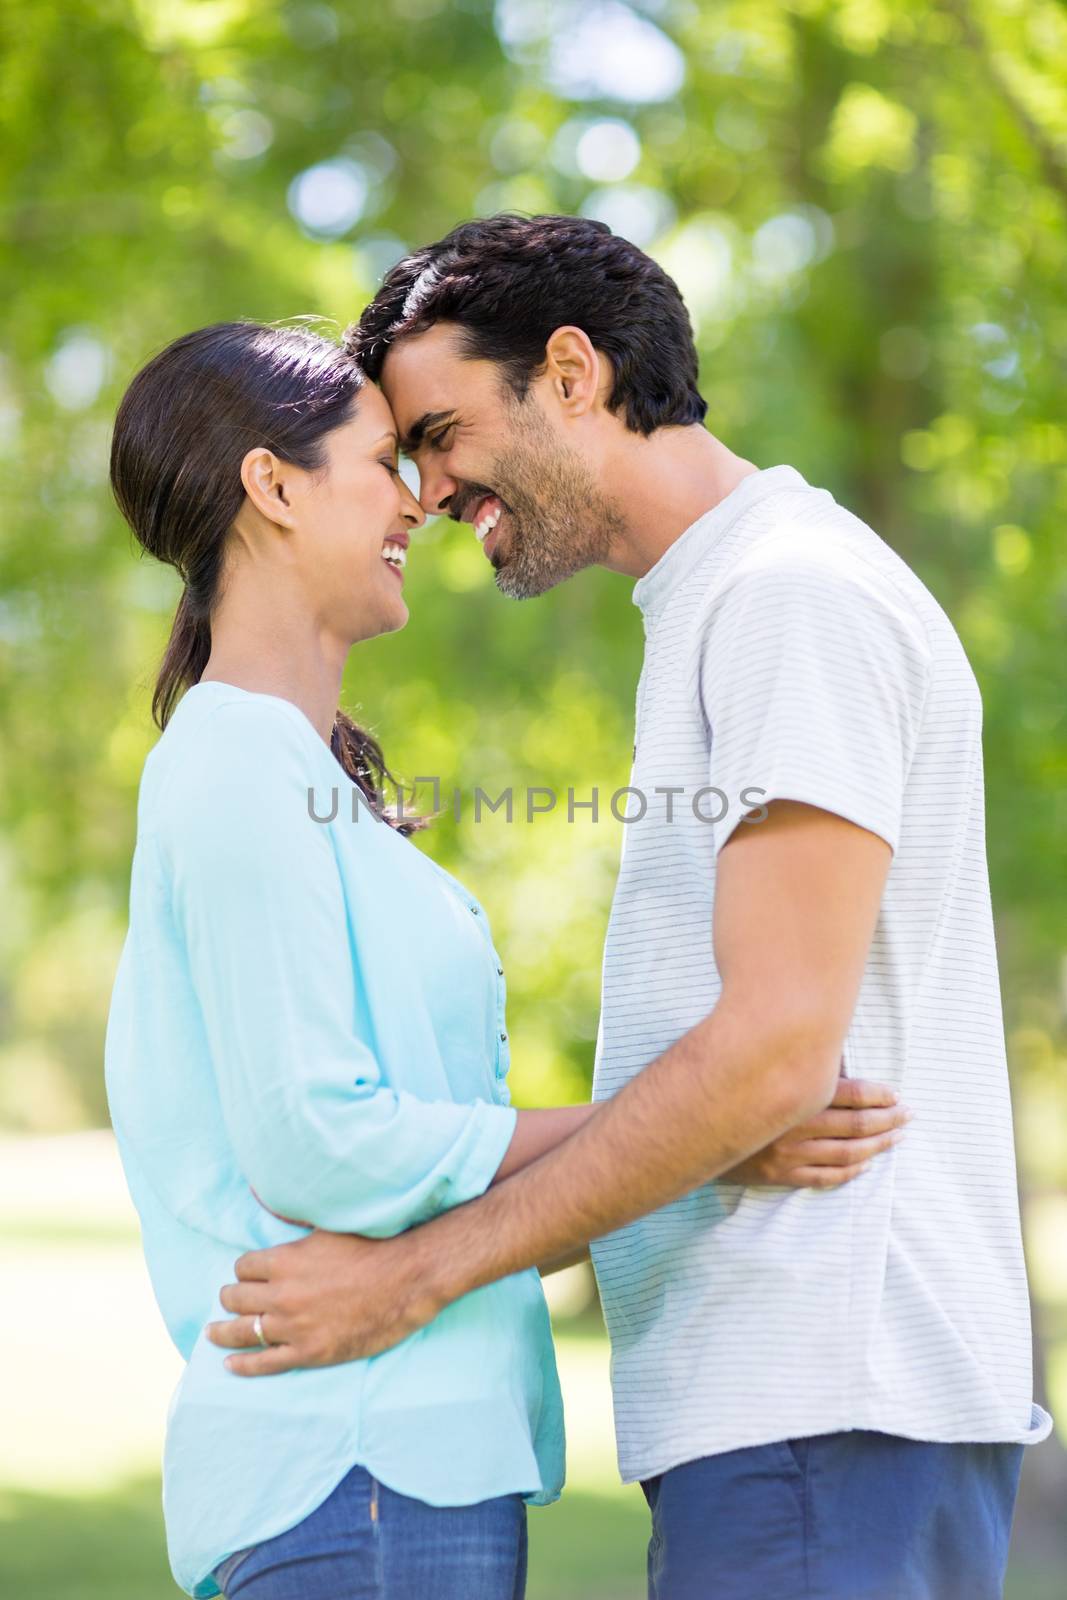 Romantic couple embracing each other in park